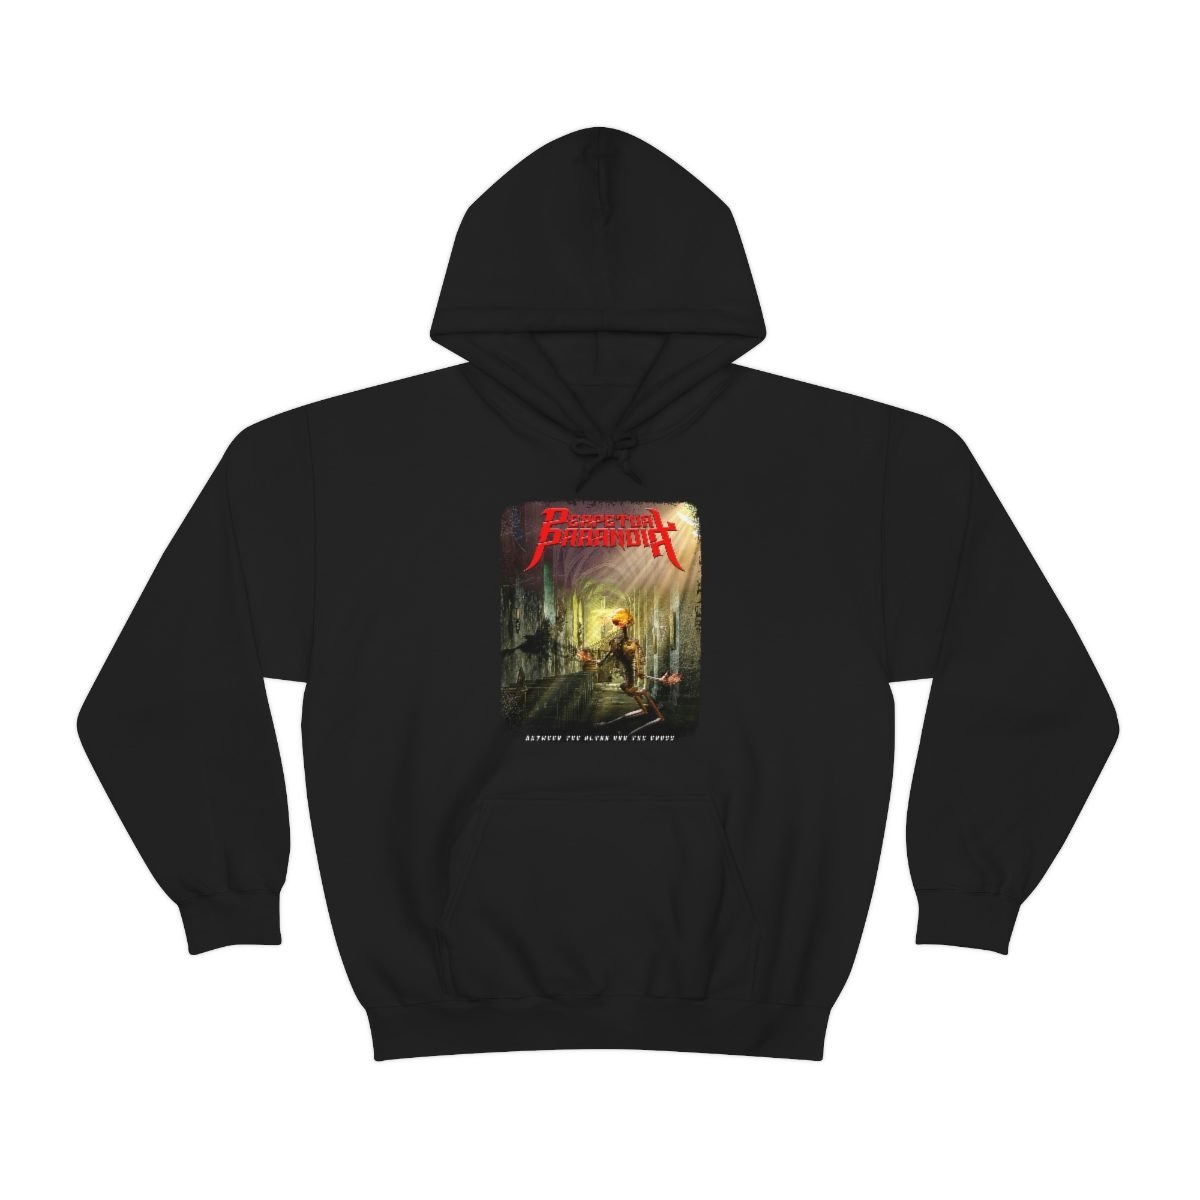 Perpetual Paranoia – Between the Altar And the Cross Pullover Hooded Sweatshirt